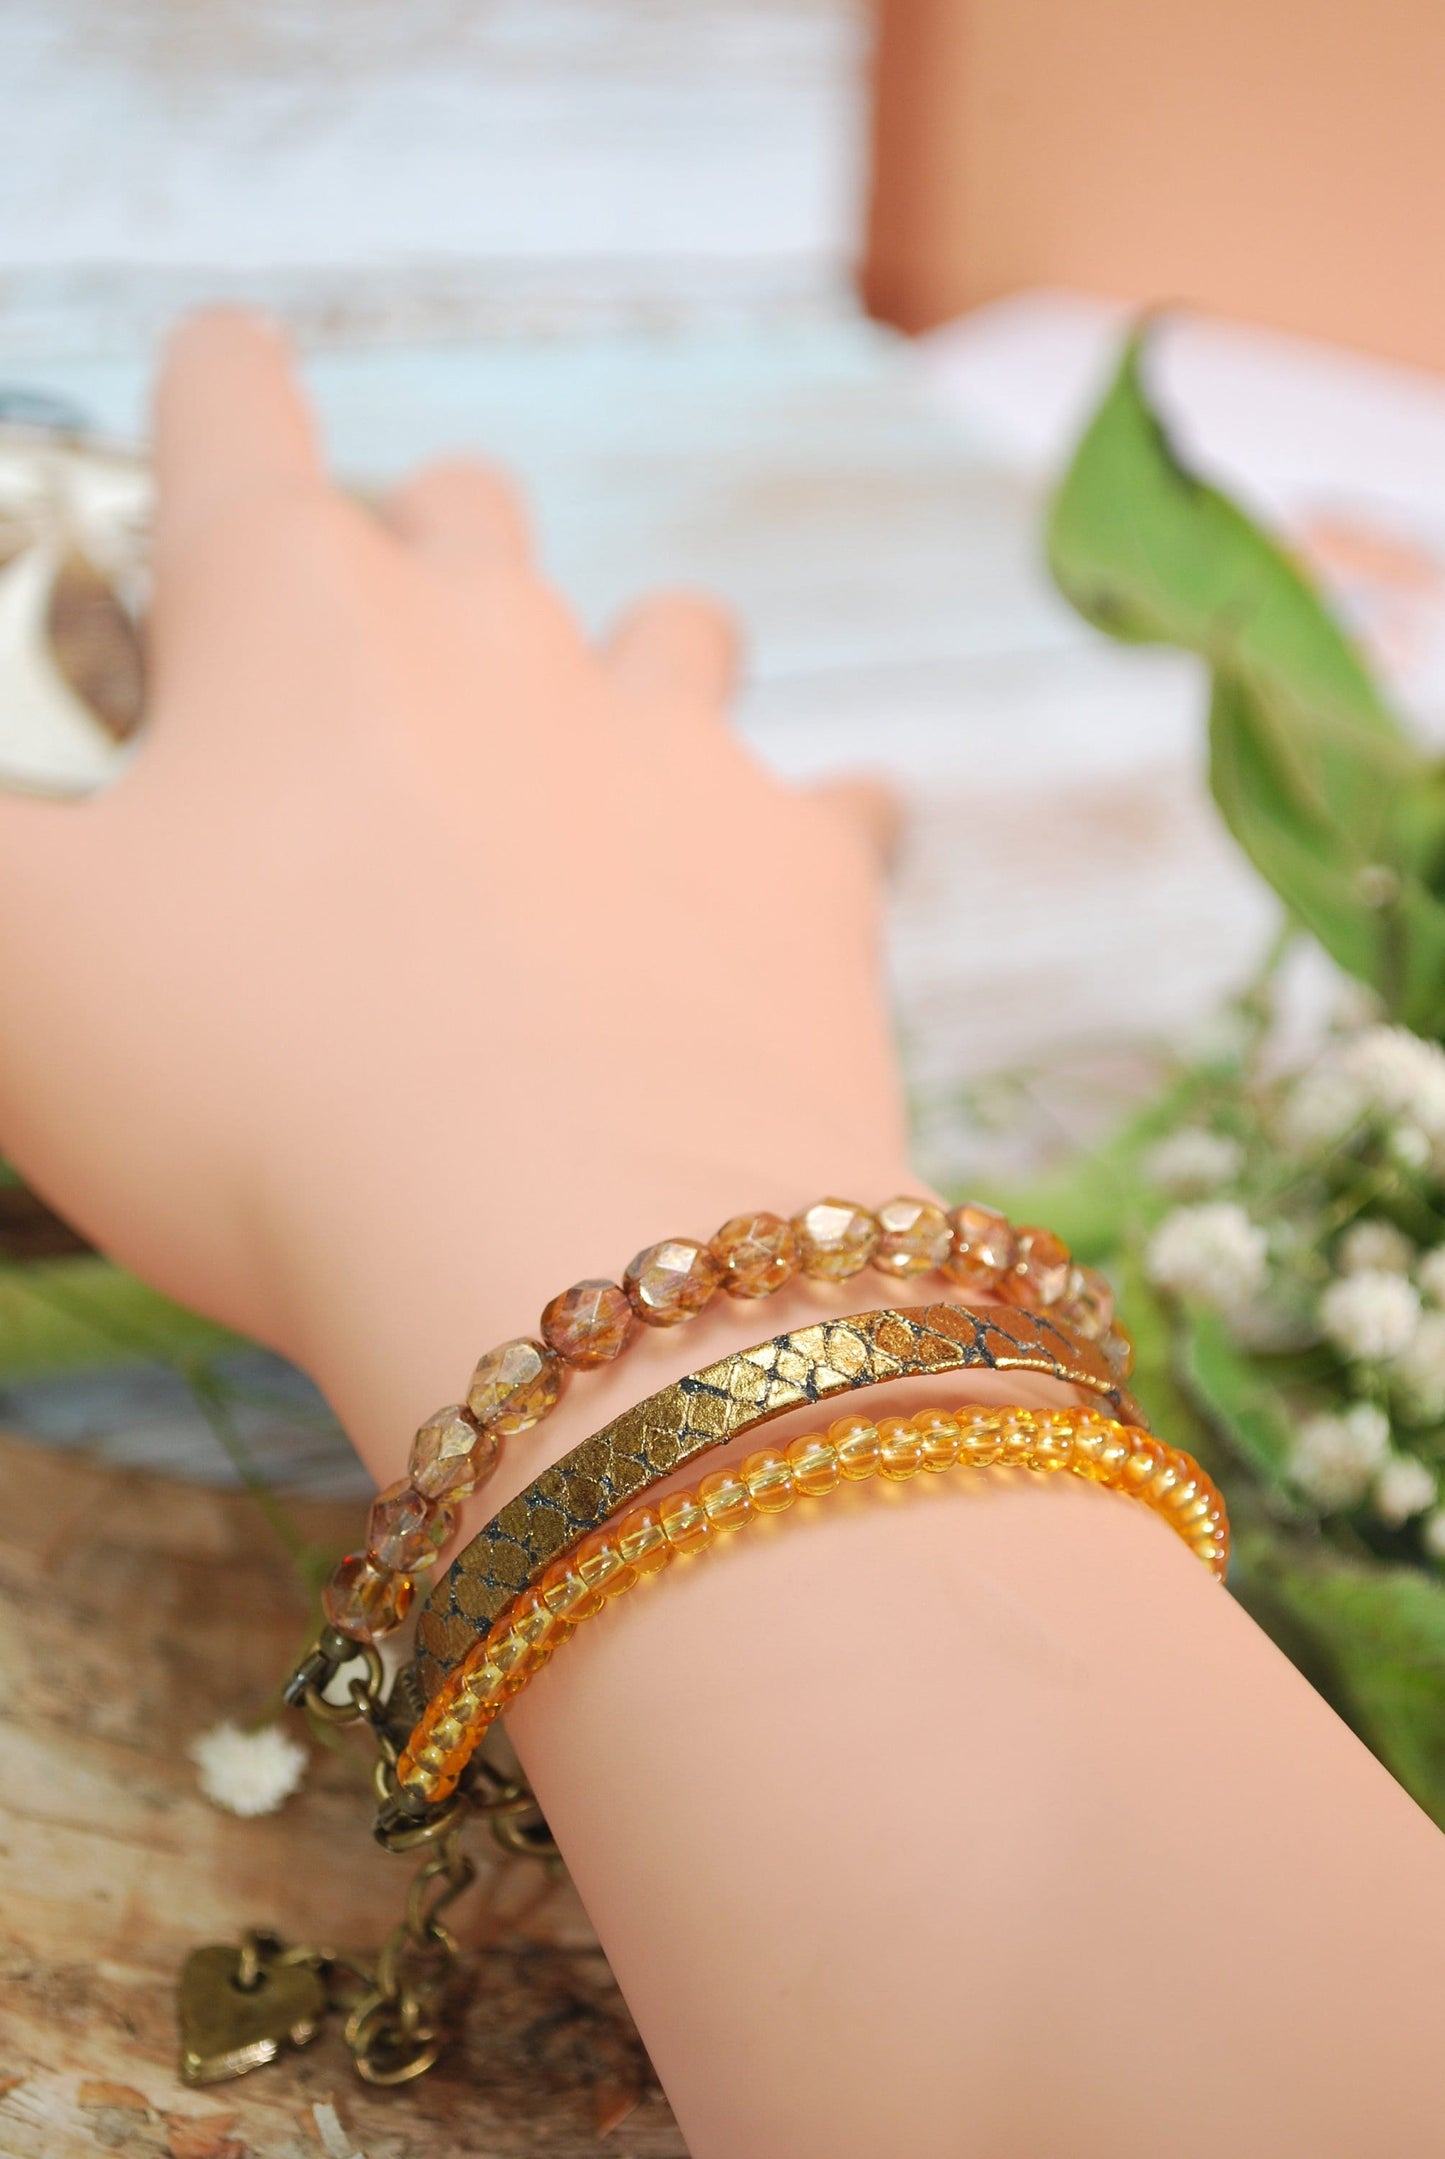 Golden Serpent Leather Wrap Bracelet: Multilayered Adjustable Women's Accessory with Bronze-Toned Glass Beads - Exude Elegance and Style.